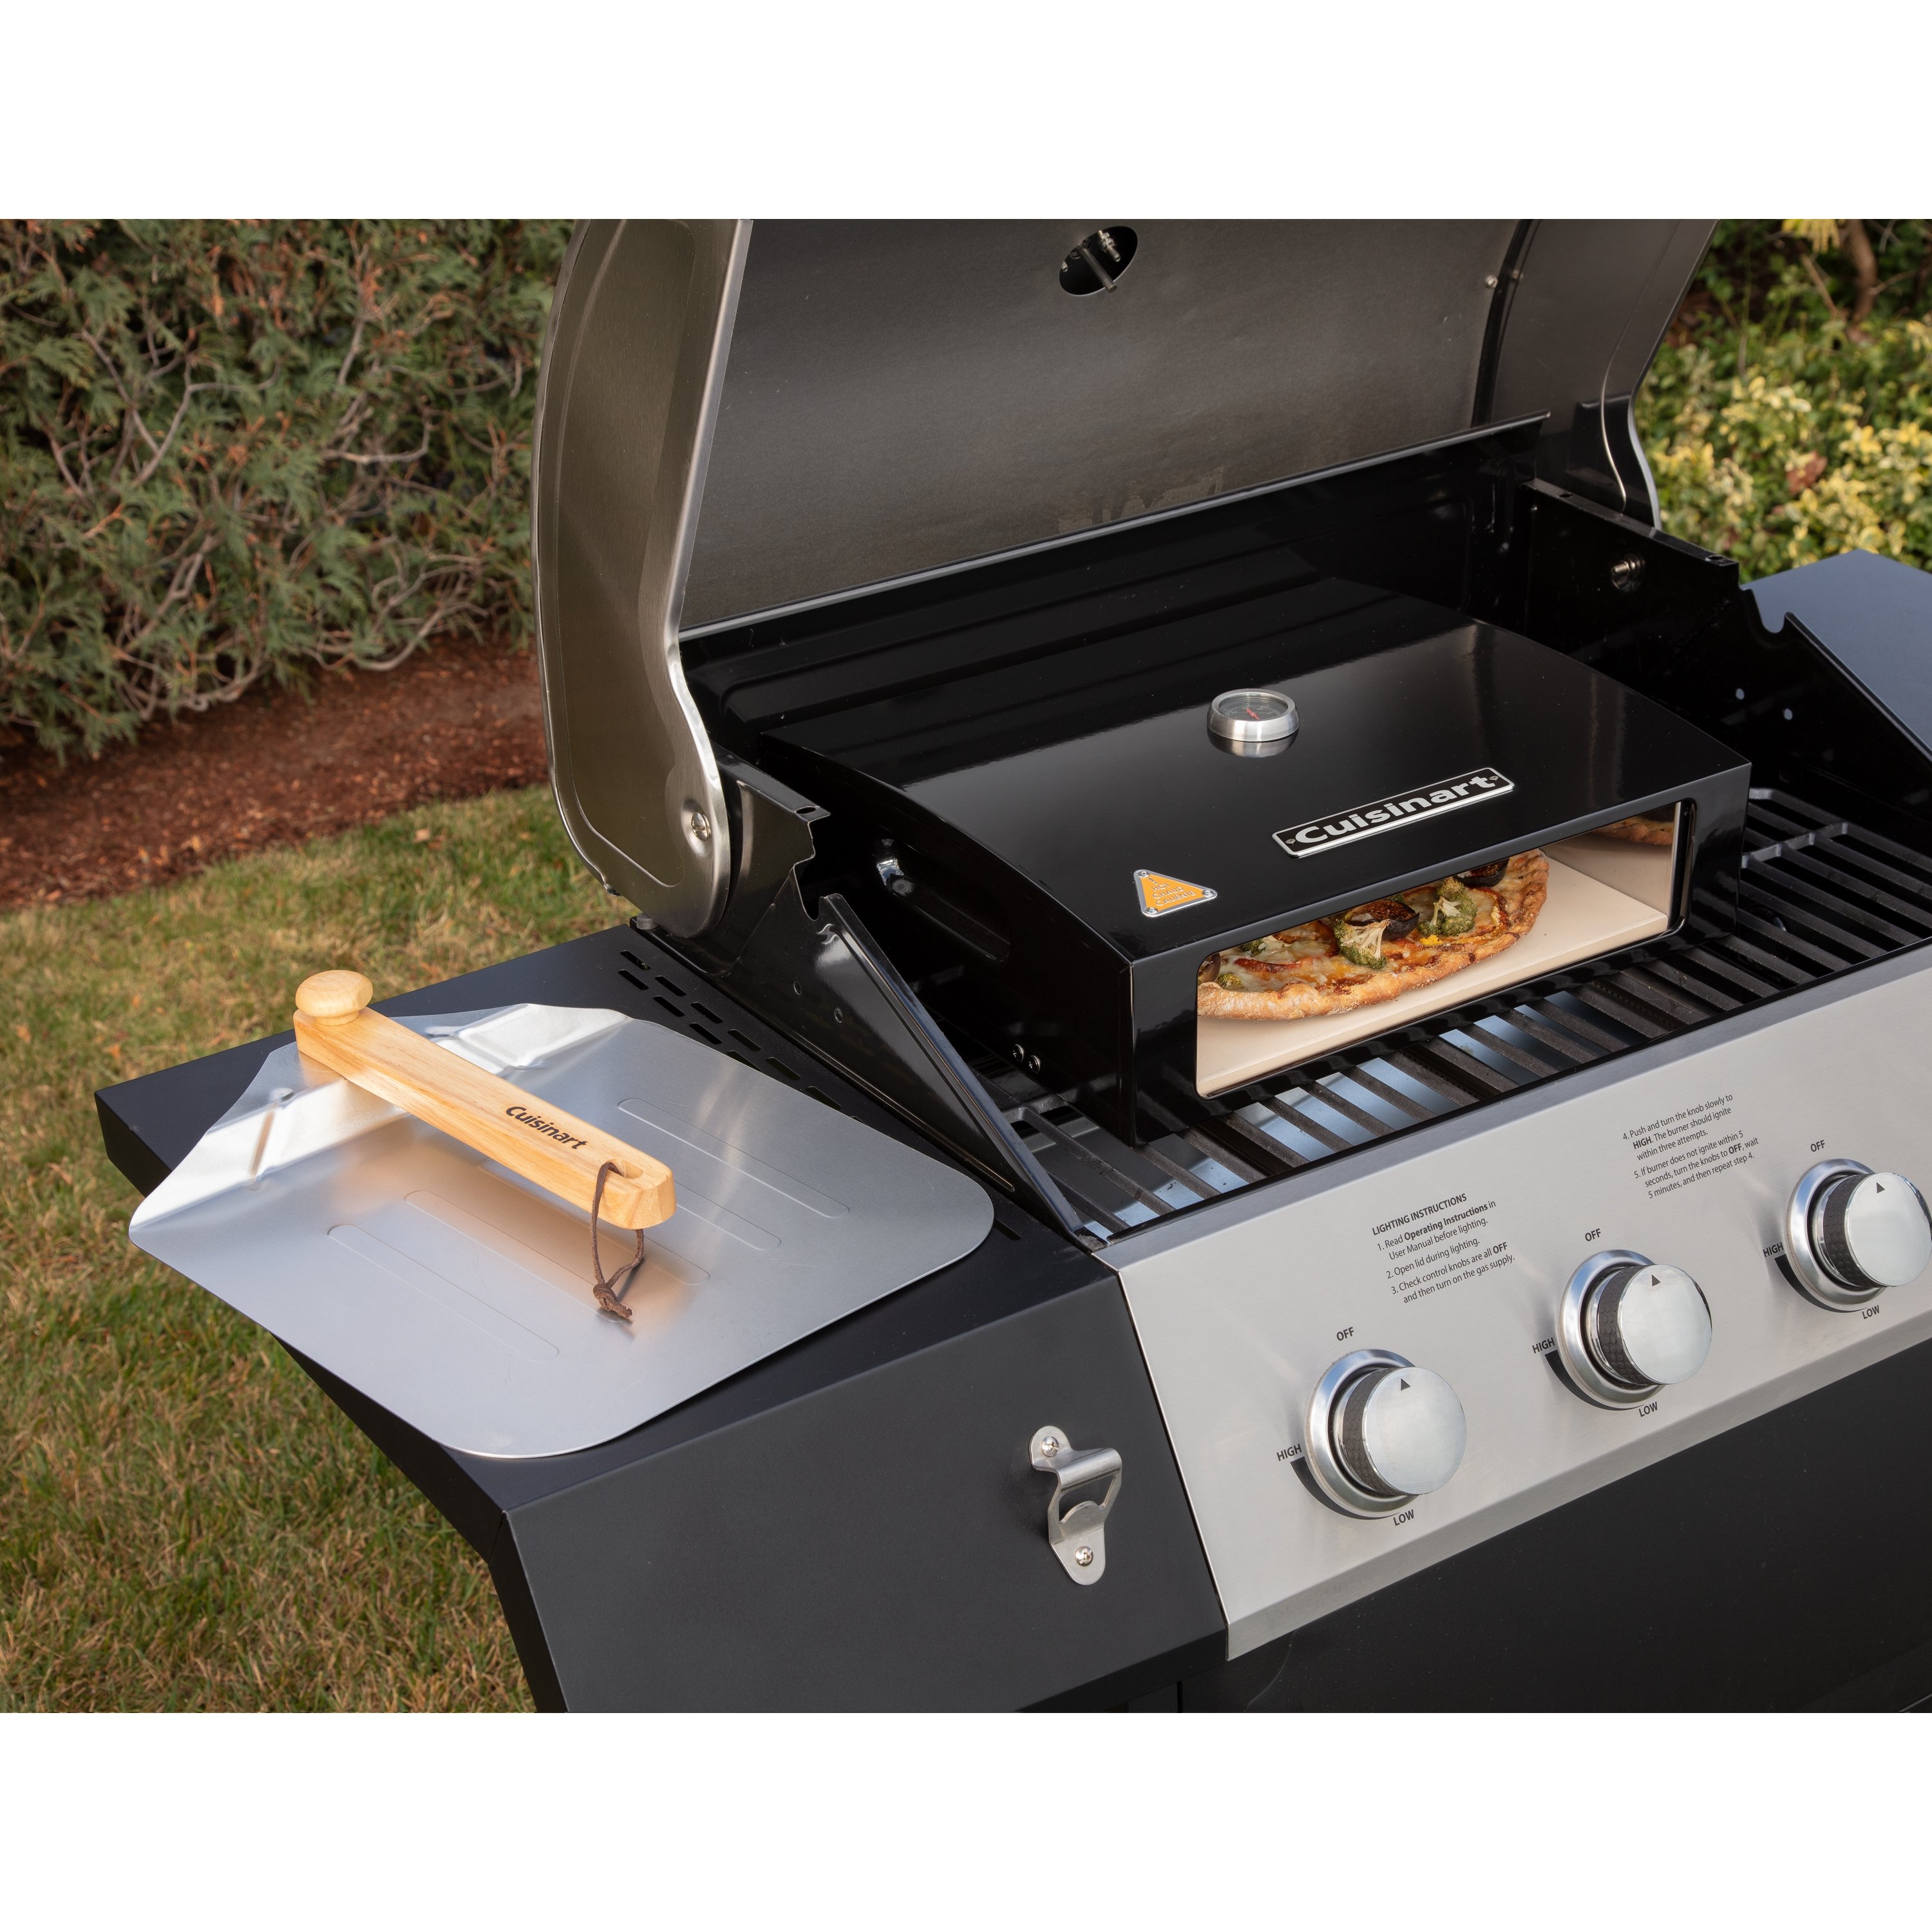 https://www.cuisinart.com/globalassets/cuisinart-image-feed/cpo-700/cpo-700-product-on-grill-w-food-lifestyle_3000-1.jpg